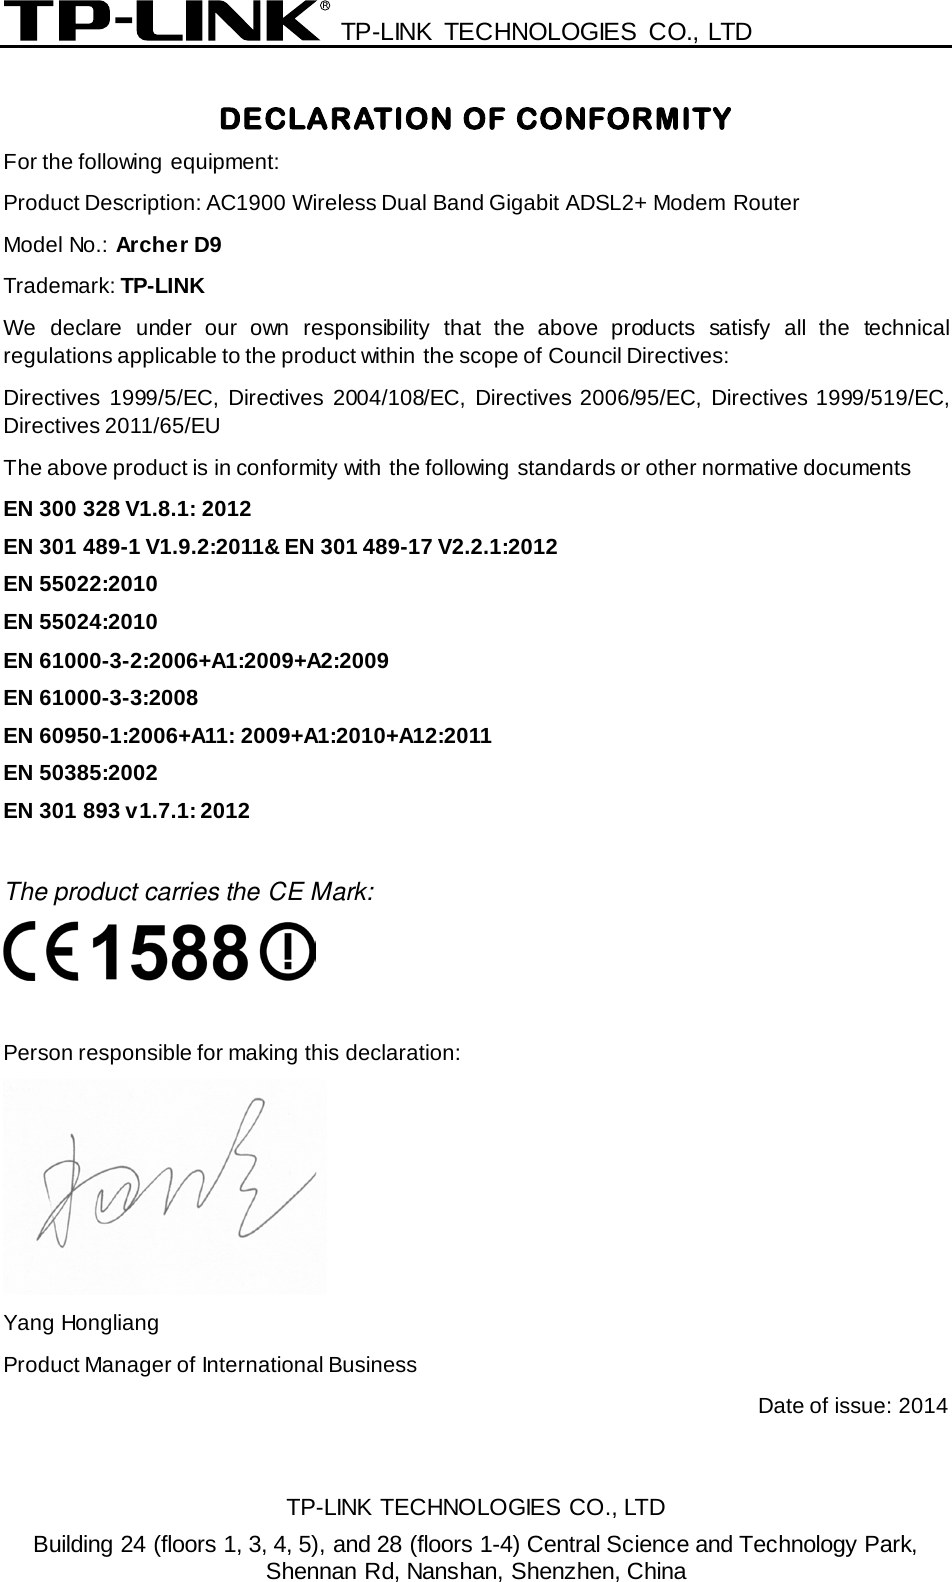  TP-LINK TECHNOLOGIES CO., LTD  DECLARATION OF CONFORMITY For the following equipment: Product Description: AC1900 Wireless Dual Band Gigabit ADSL2+ Modem Router Model No.: Archer D9 Trademark: TP-LINK We declare under our own responsibility that the above products satisfy all the technical regulations applicable to the product within the scope of Council Directives:     Directives 1999/5/EC,  Directives 2004/108/EC, Directives 2006/95/EC, Directives 1999/519/EC, Directives 2011/65/EU The above product is in conformity with the following standards or other normative documents EN 300 328 V1.8.1: 2012 EN 301 489-1 V1.9.2:2011&amp; EN 301 489-17 V2.2.1:2012 EN 55022:2010 EN 55024:2010 EN 61000-3-2:2006+A1:2009+A2:2009 EN 61000-3-3:2008 EN 60950-1:2006+A11: 2009+A1:2010+A12:2011 EN 50385:2002 EN 301 893 v1.7.1: 2012  The product carries the CE Mark:   Person responsible for making this declaration:  Yang Hongliang Product Manager of International Business   Date of issue: 2014 TP-LINK TECHNOLOGIES CO., LTD Building 24 (floors 1, 3, 4, 5), and 28 (floors 1-4) Central Science and Technology Park, Shennan Rd, Nanshan, Shenzhen, China 